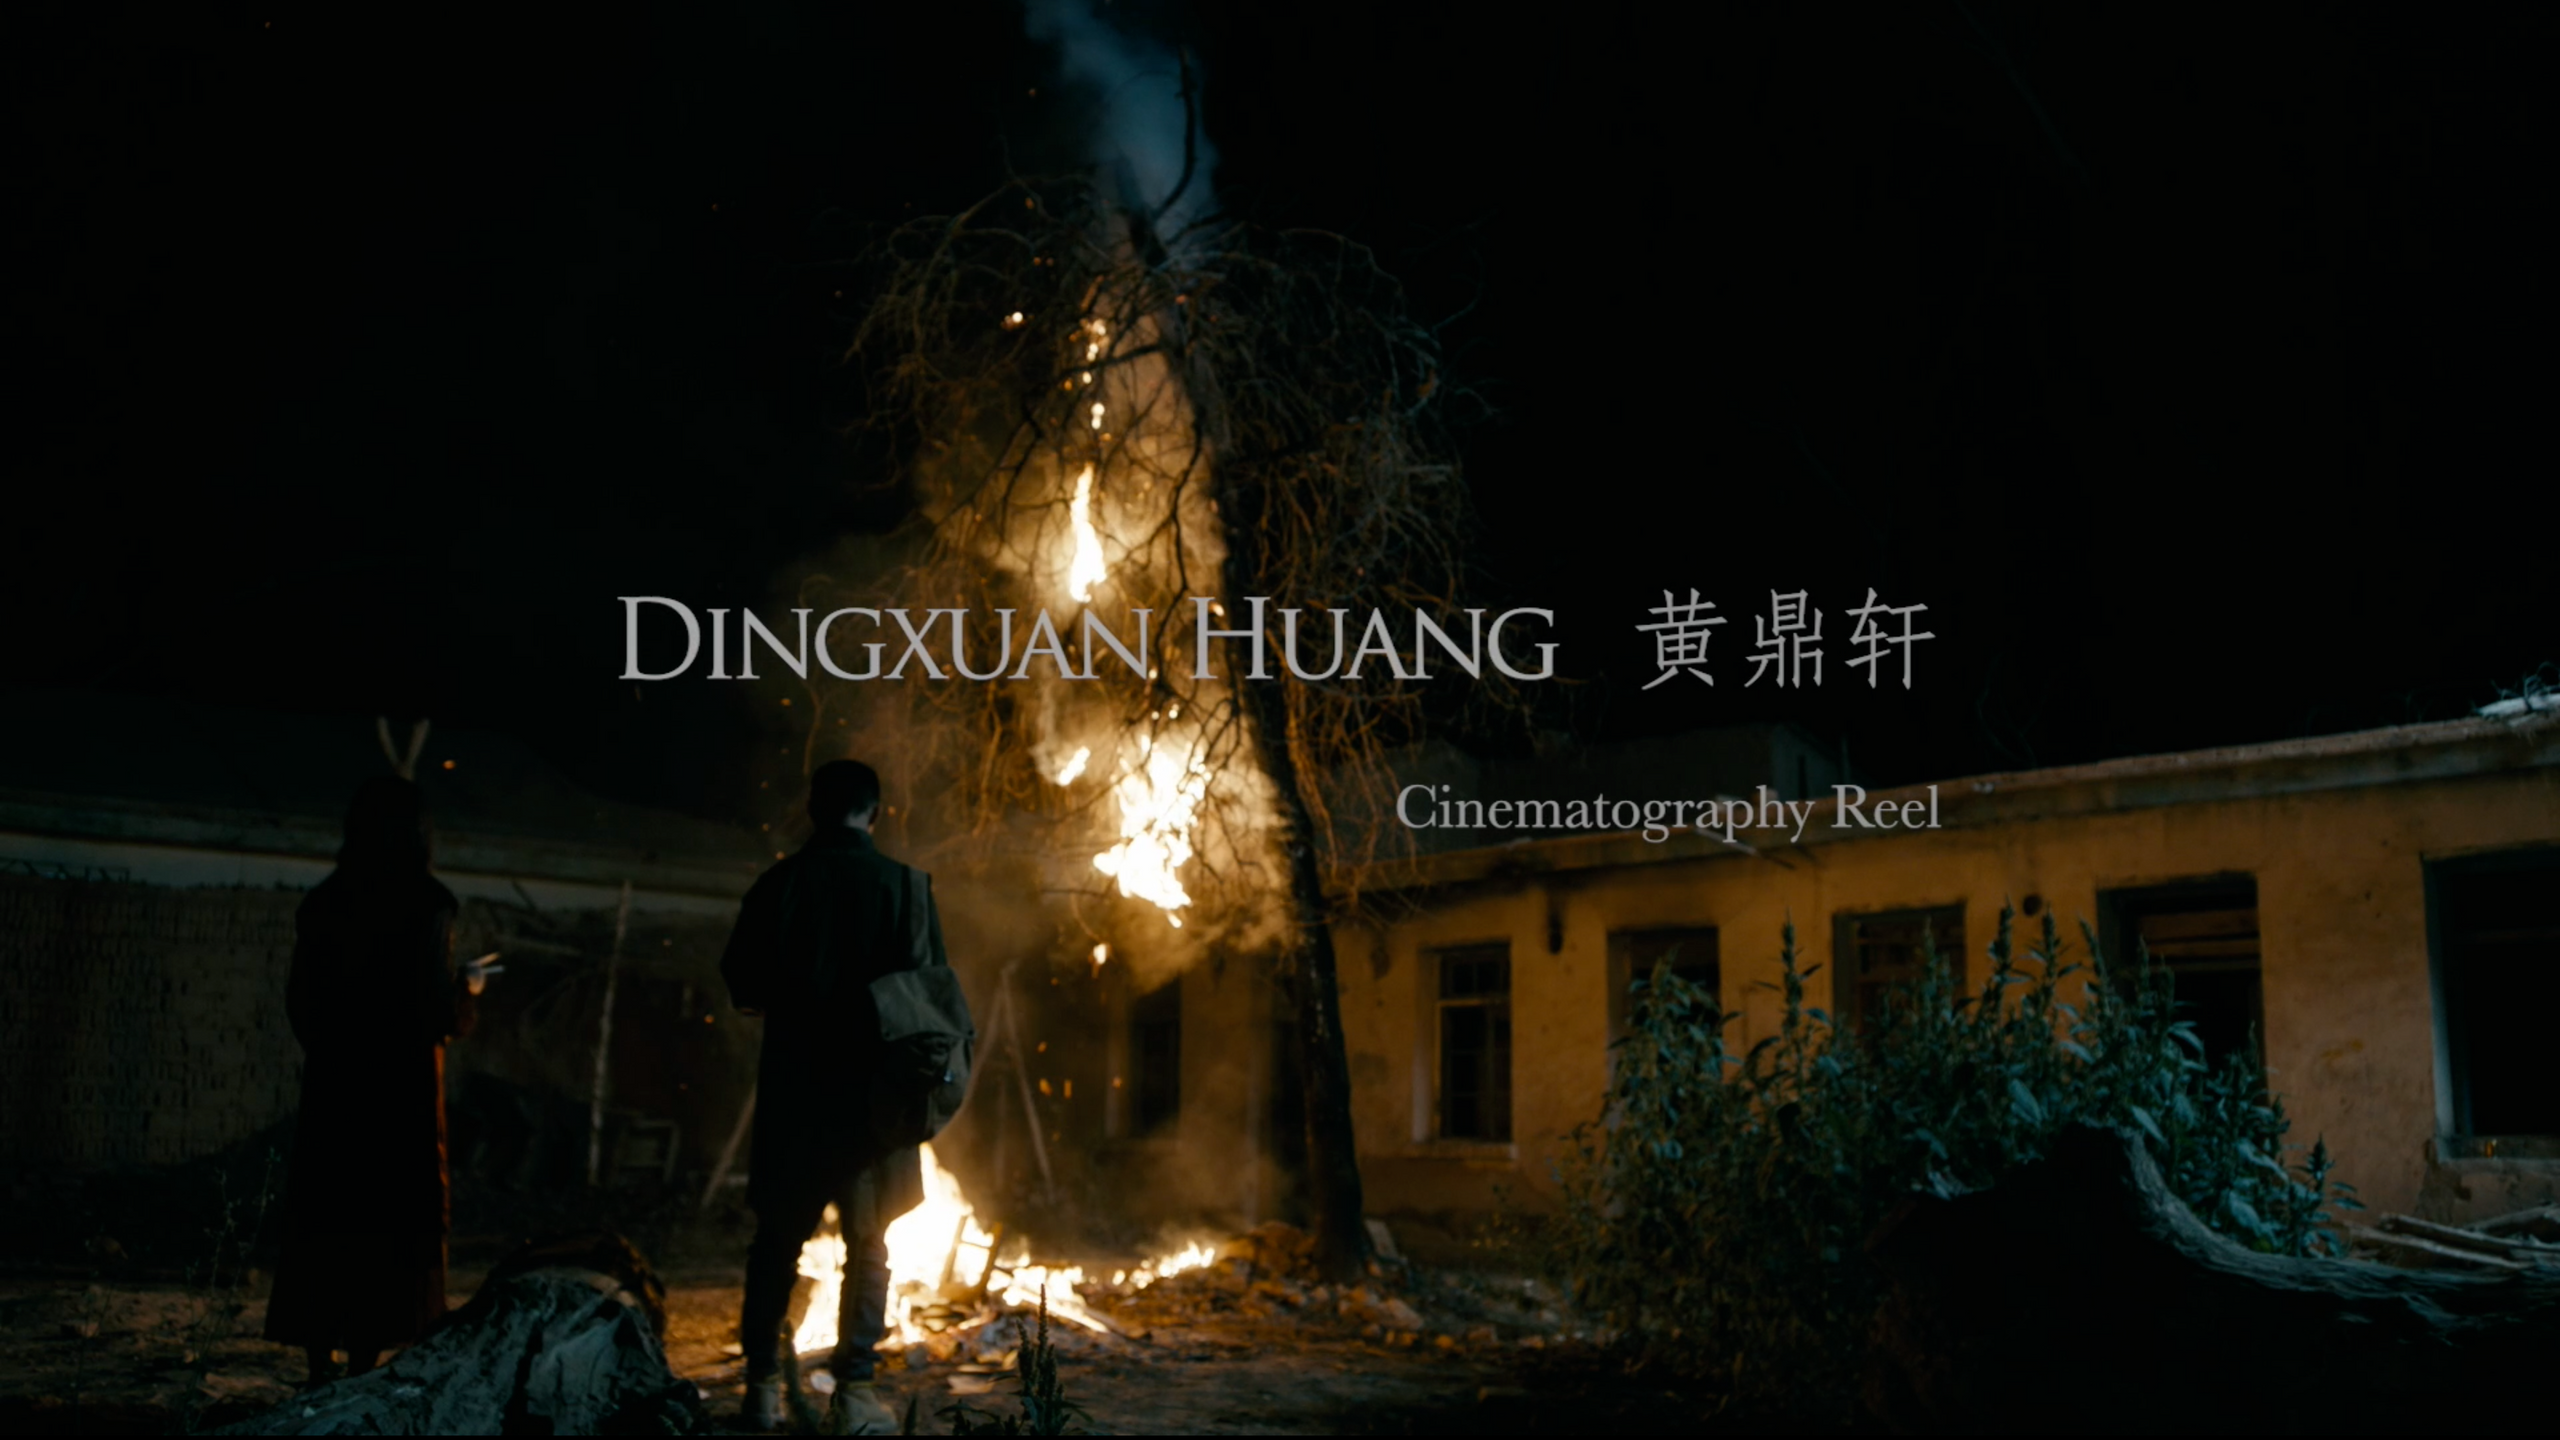 DingxuanHuang Cine Reel 2019